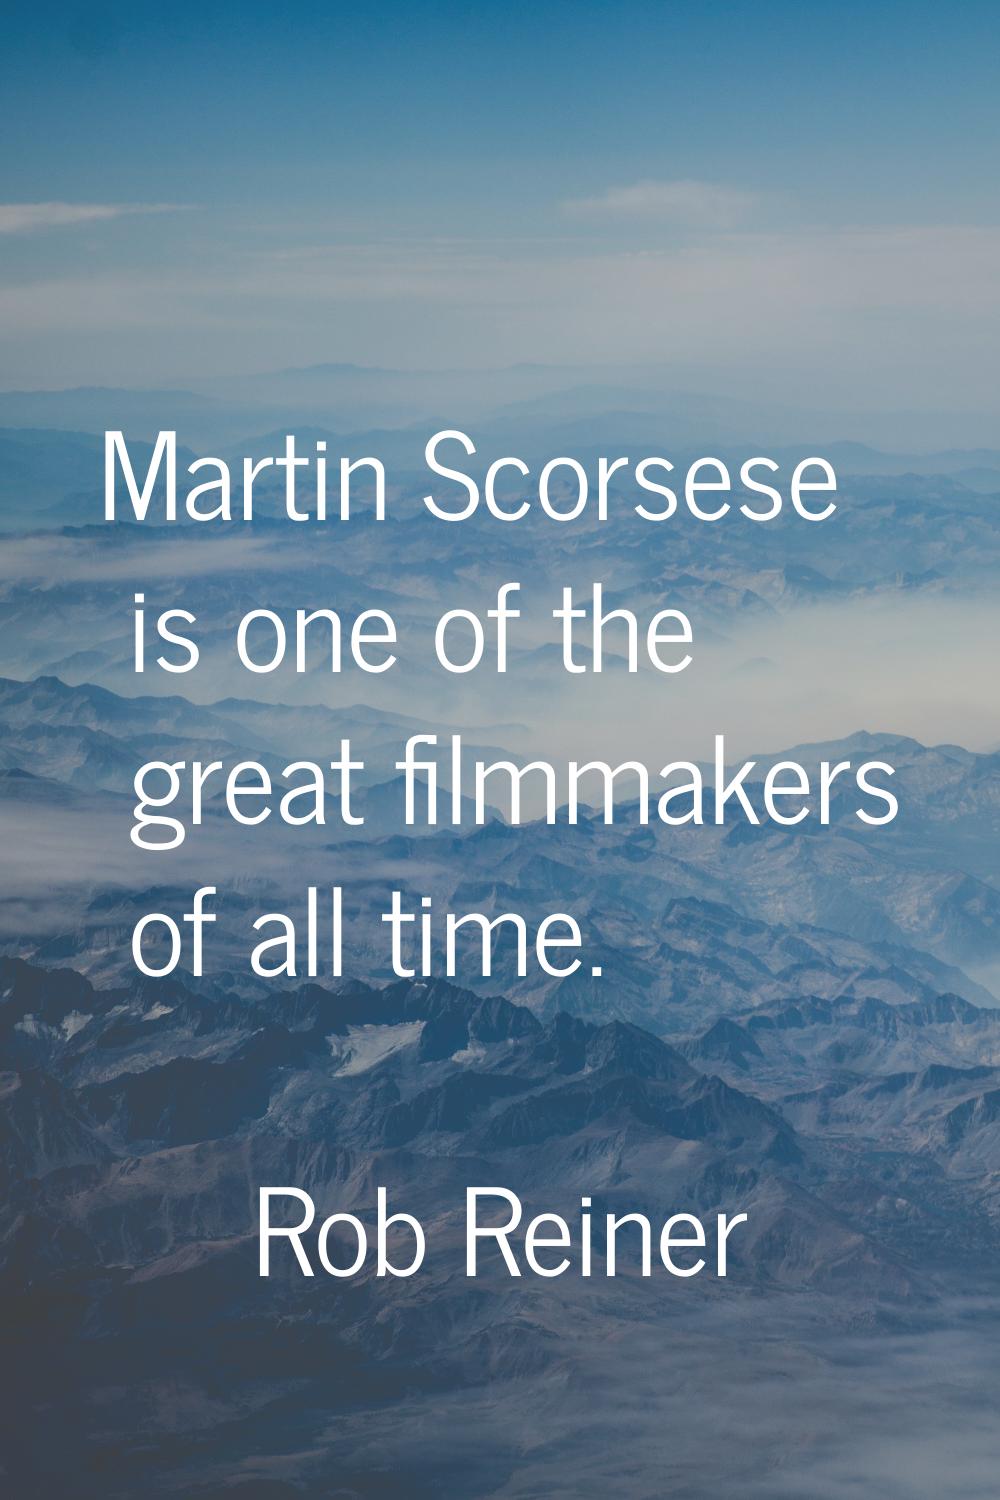 Martin Scorsese is one of the great filmmakers of all time.